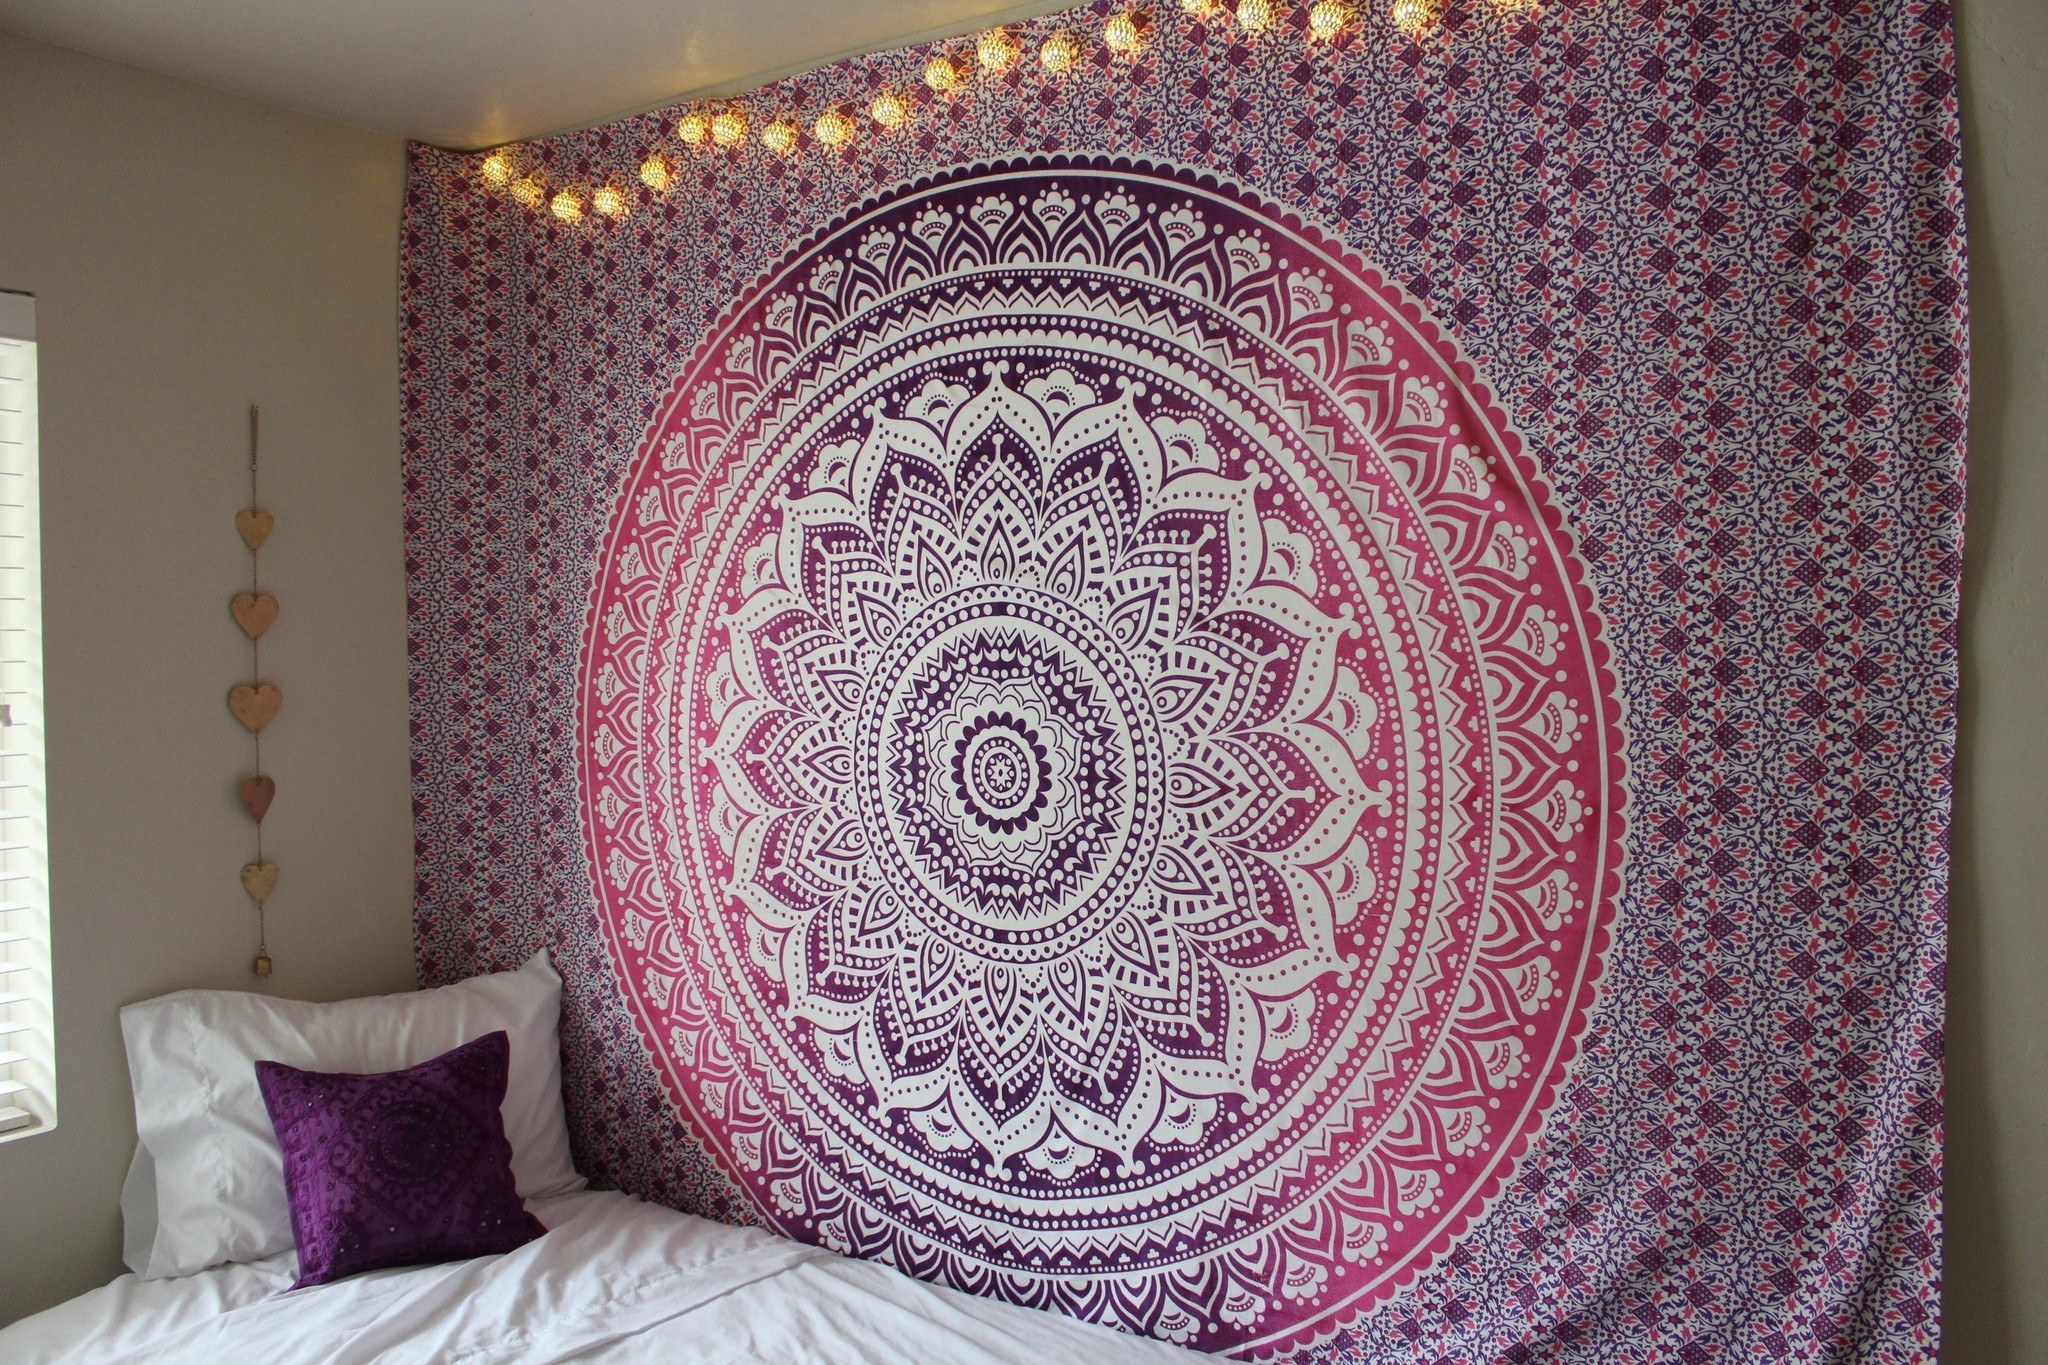 Poster Size Indian Mandala Tapestry Hippie Wall Hanging Decor Blanket Throw new 